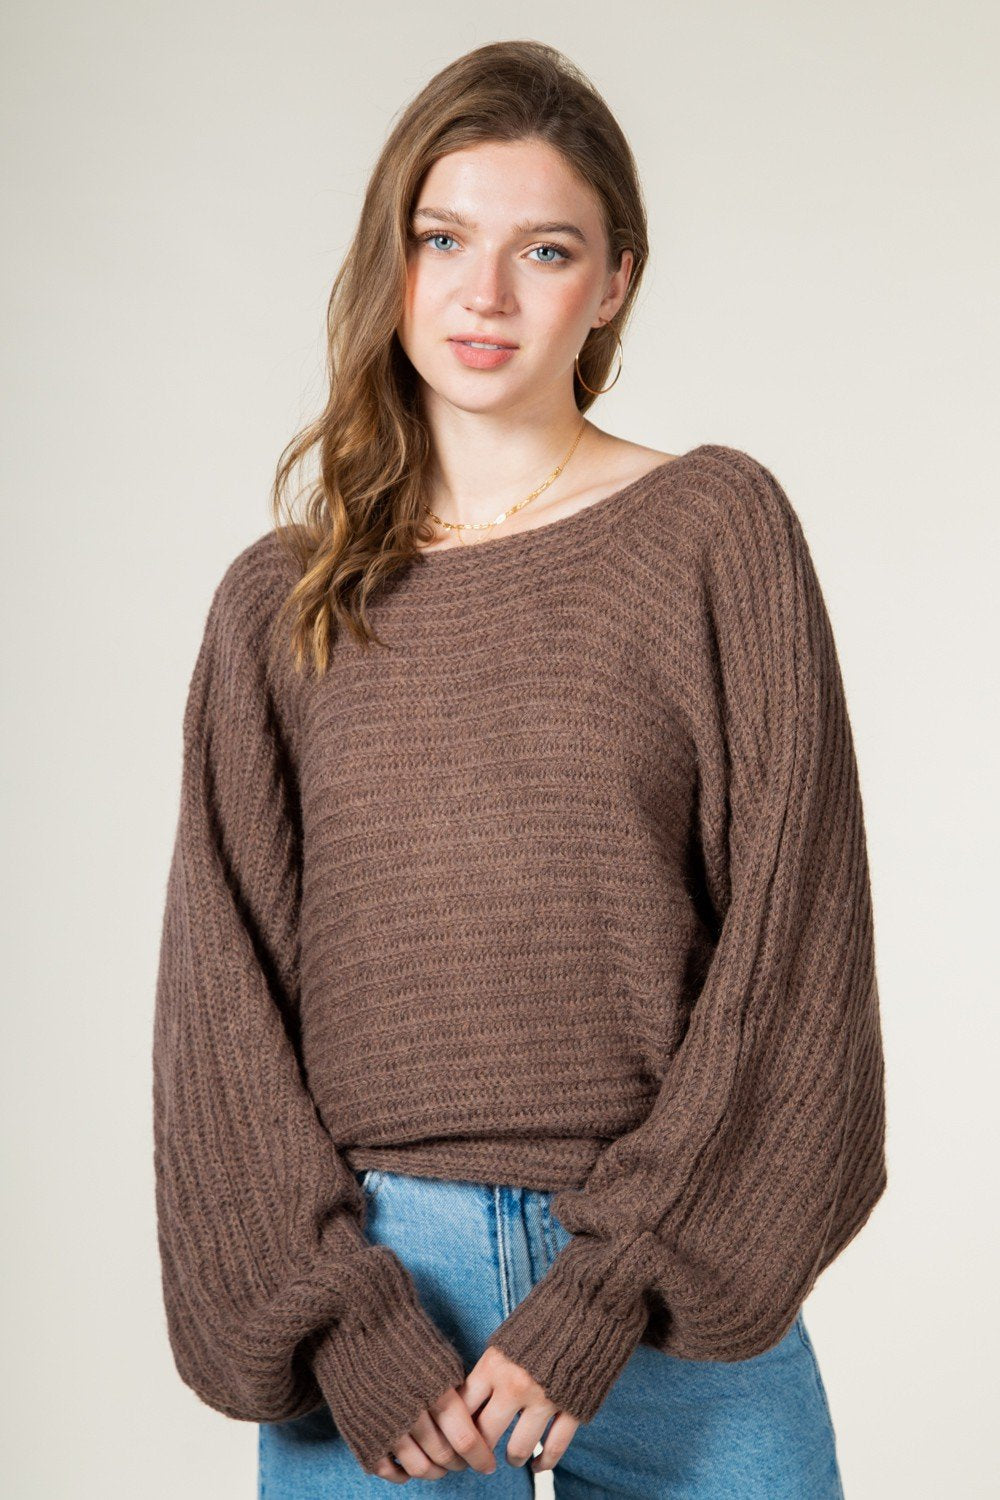 Forget About Tomorrow Sweater - Cocoa